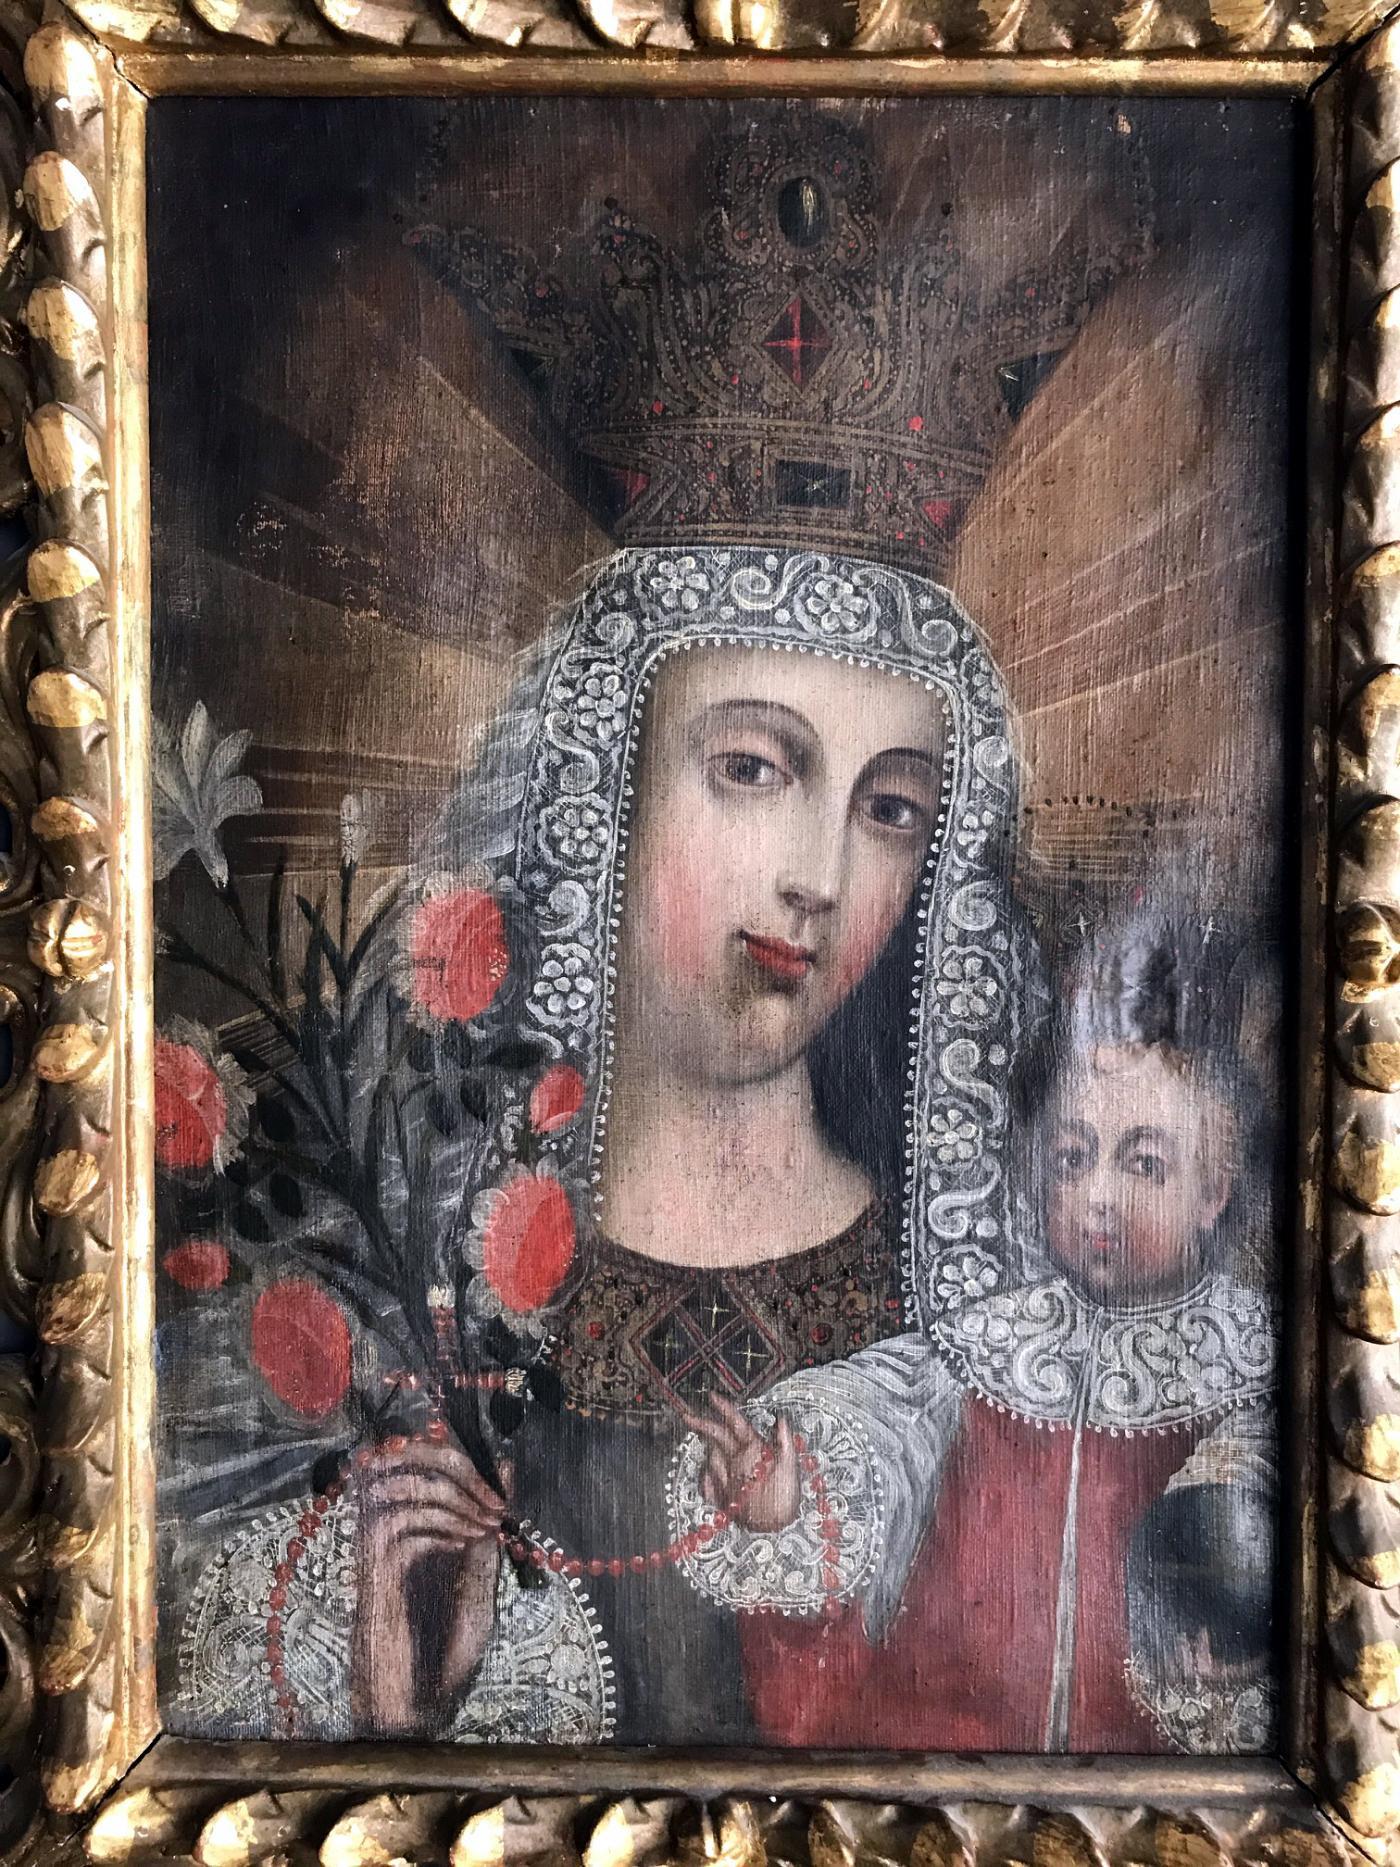 A lovely antique oil on linen painting from Spanish Colonial period late 18th-early 19th century. In the style of Classic Cuzco School, the painting depicts Madonna and Baby Christ and were heavily embellished with symbols of Christianity influenced